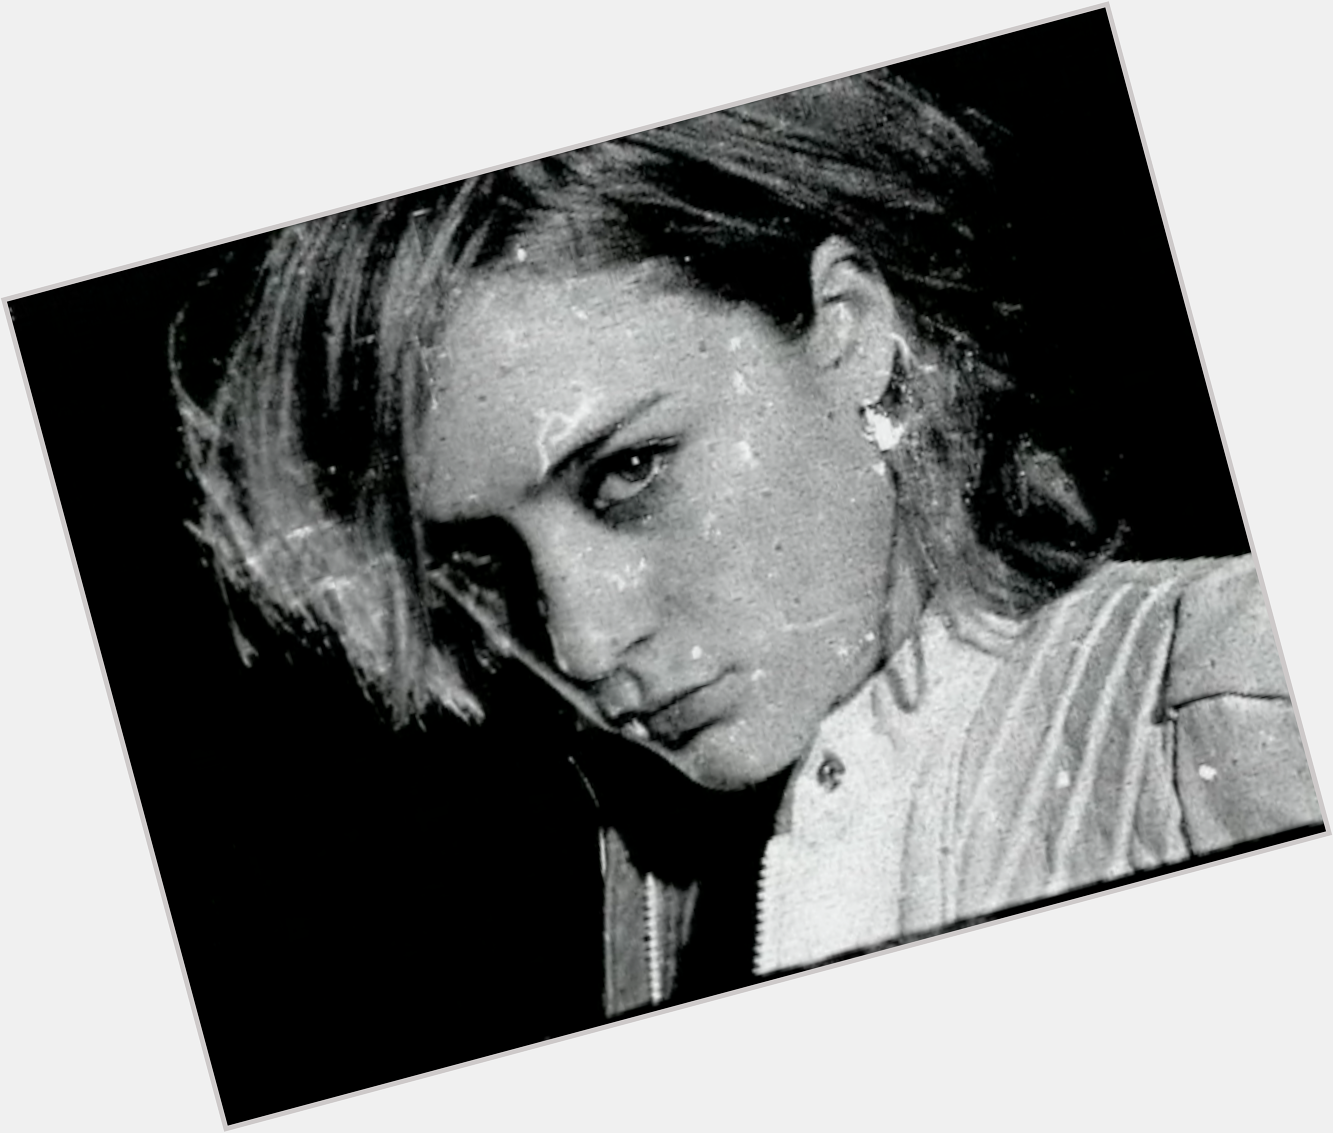 Happy birthday, Chloë Sevigny! Flashback to 90s NYC frolics as the indie darling turns 40  